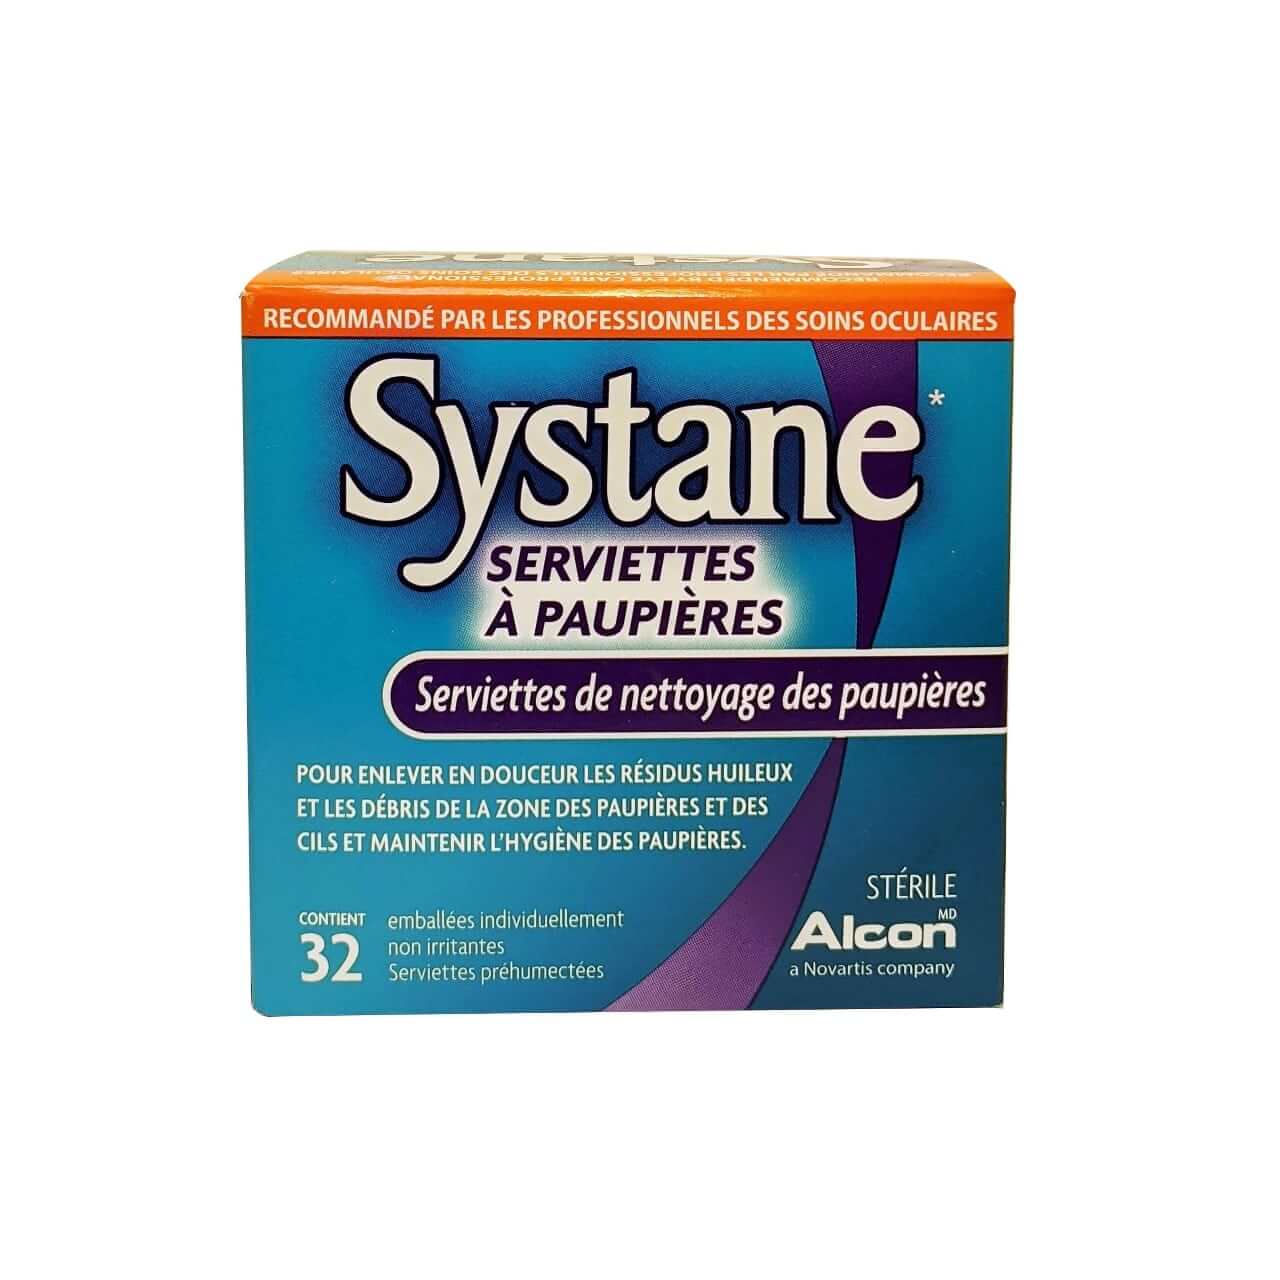 French package label for Alcon Systane Lid Wipes